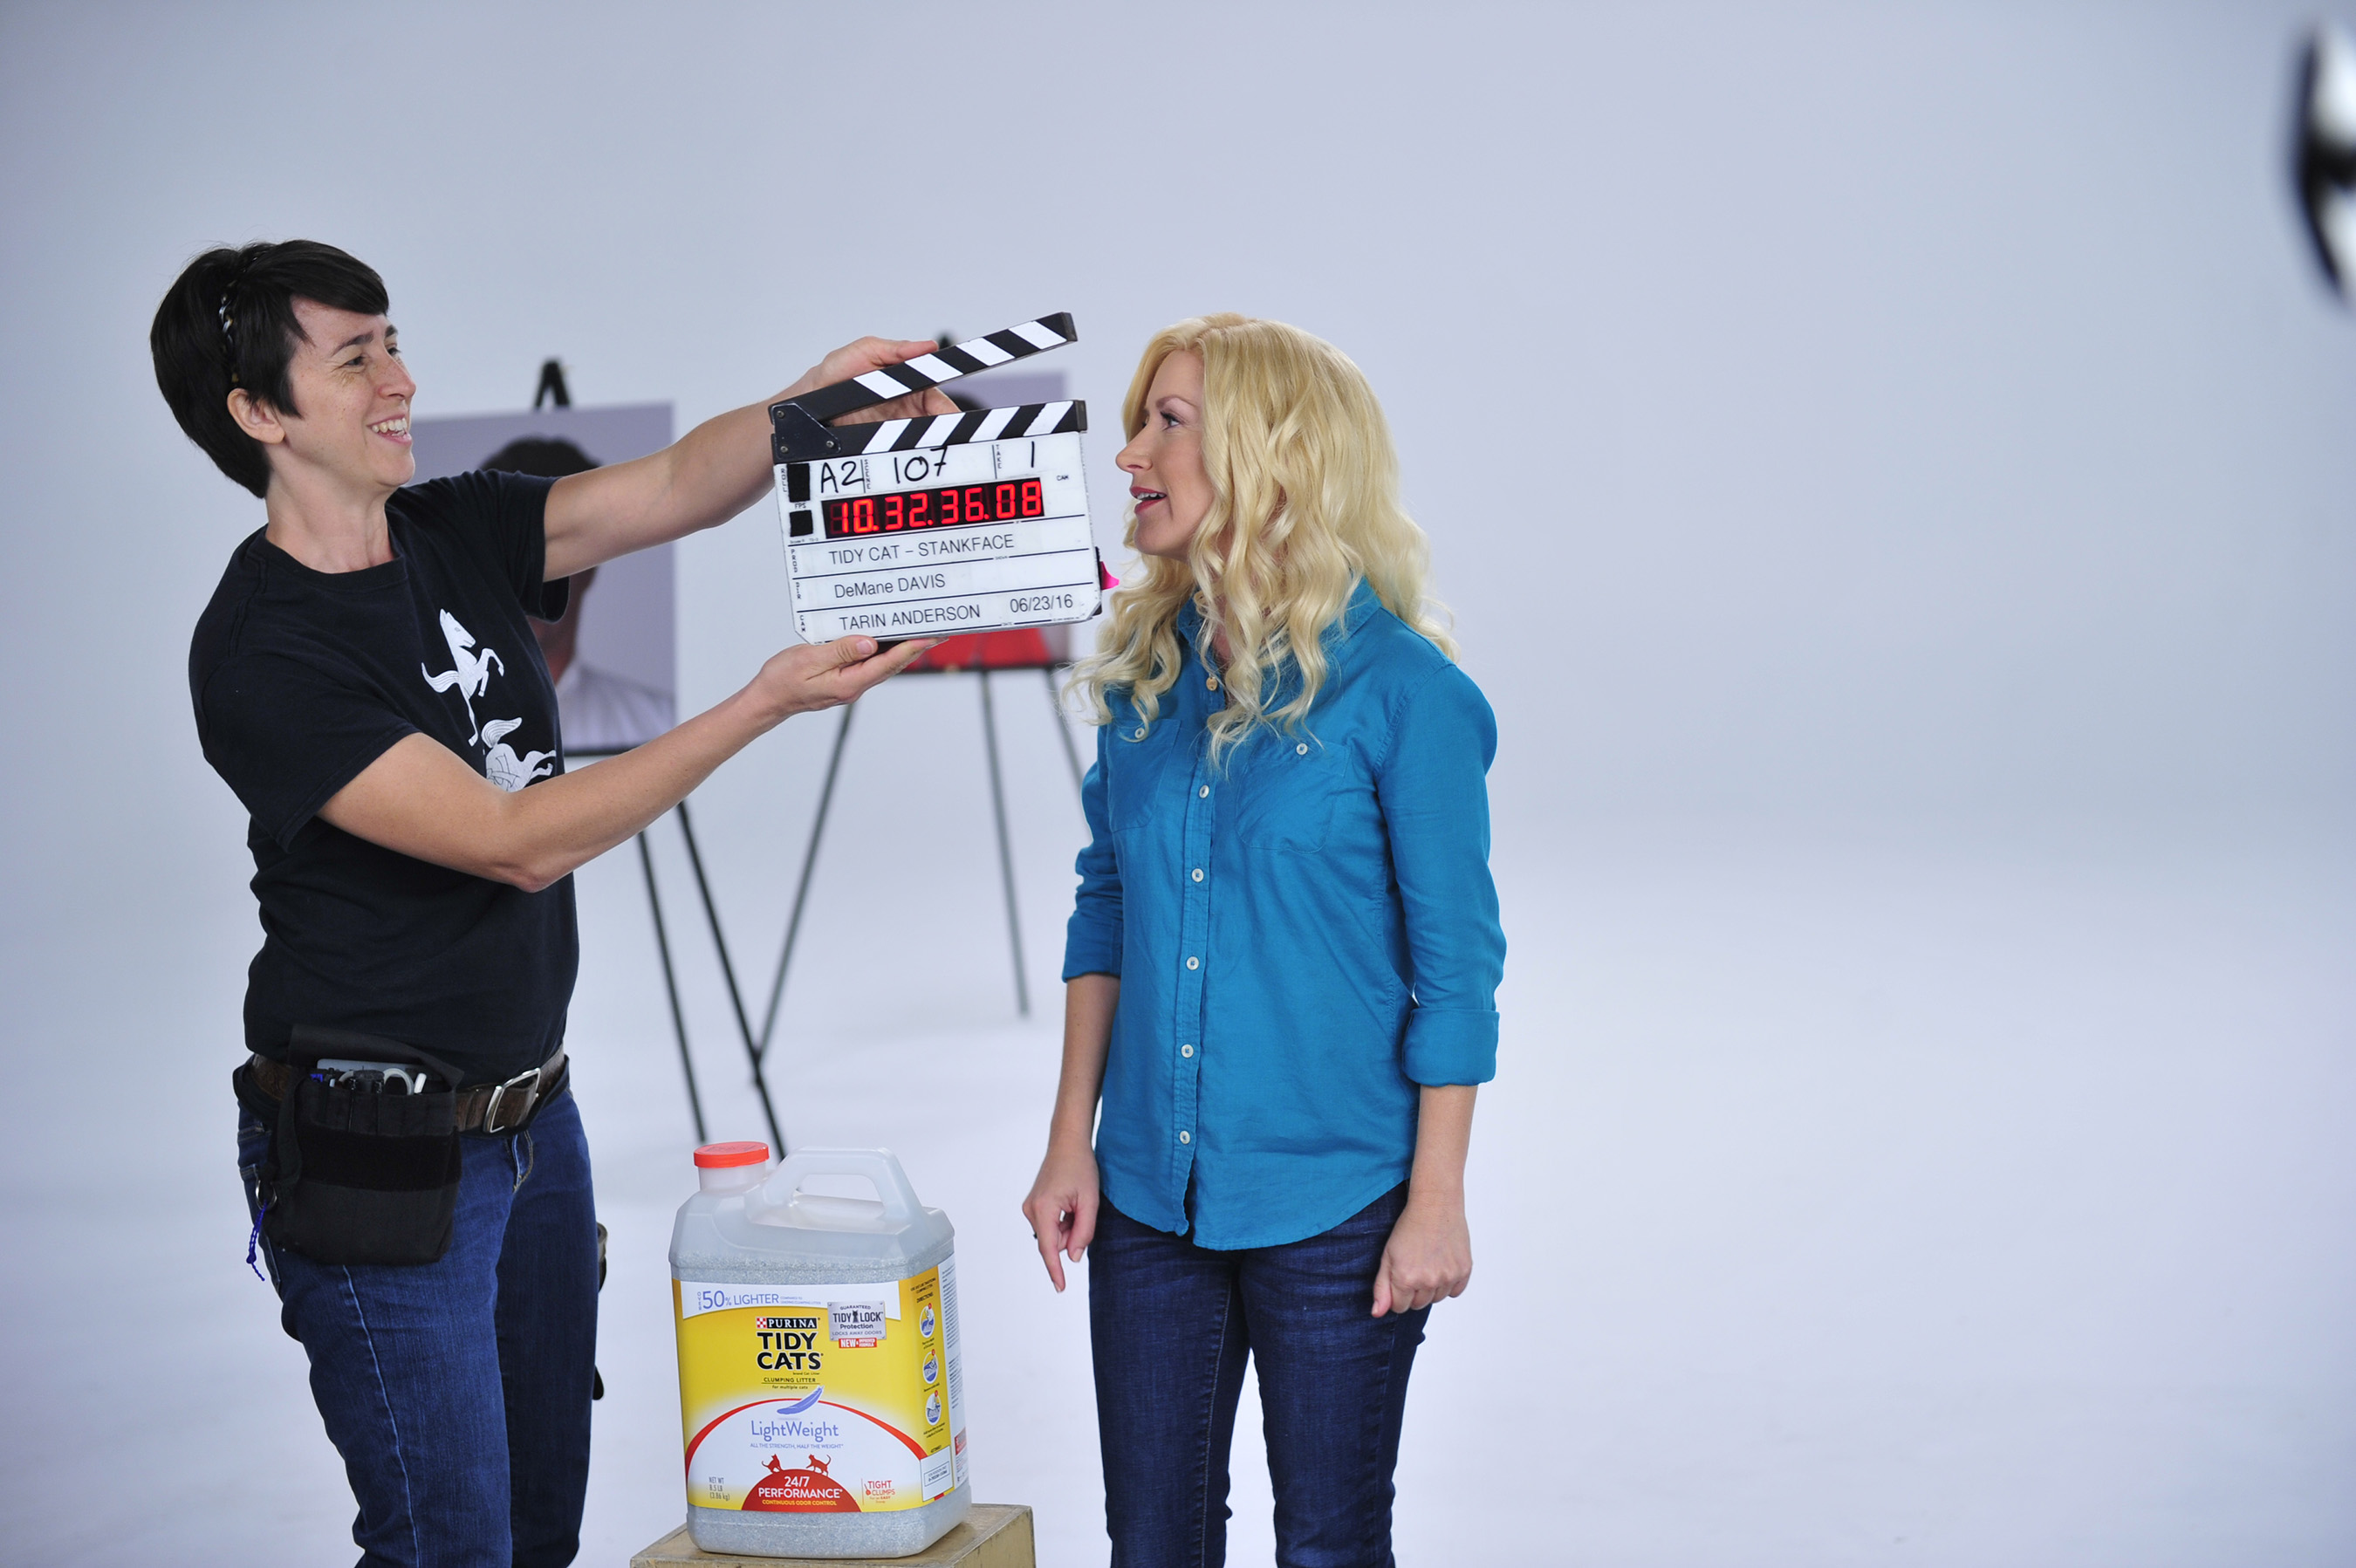 Actress Angela Kinsey records a new “Stop Stank Face” public service announcement with Tidy Cats® to help educate cat owners on the devastating effects of Stank Face, the universal expression of disgust caused by litter box odor.